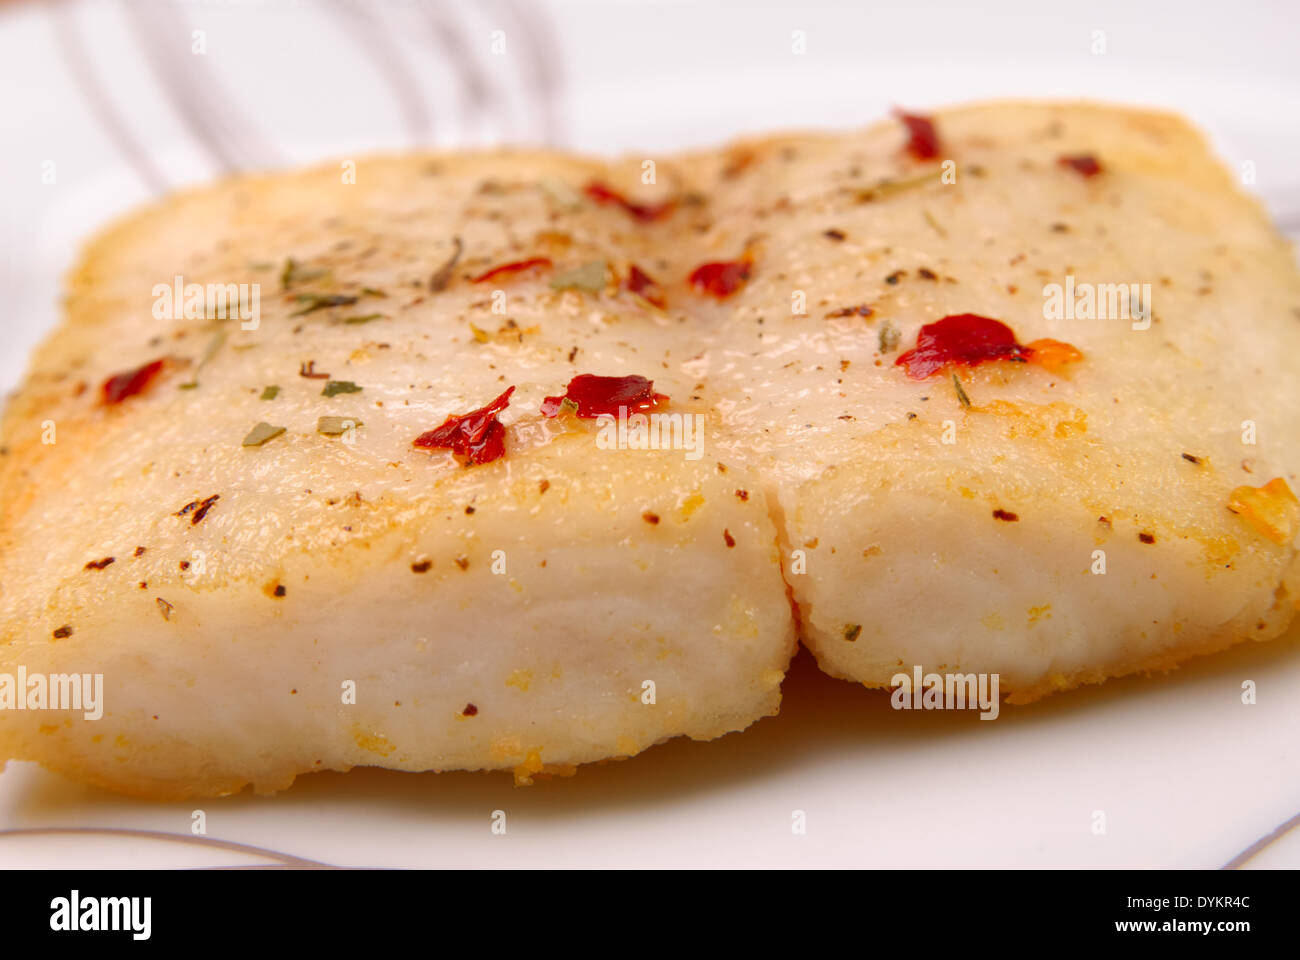 Catfish with aromatic herbs served on a white plate. Shallow depth of field Stock Photo